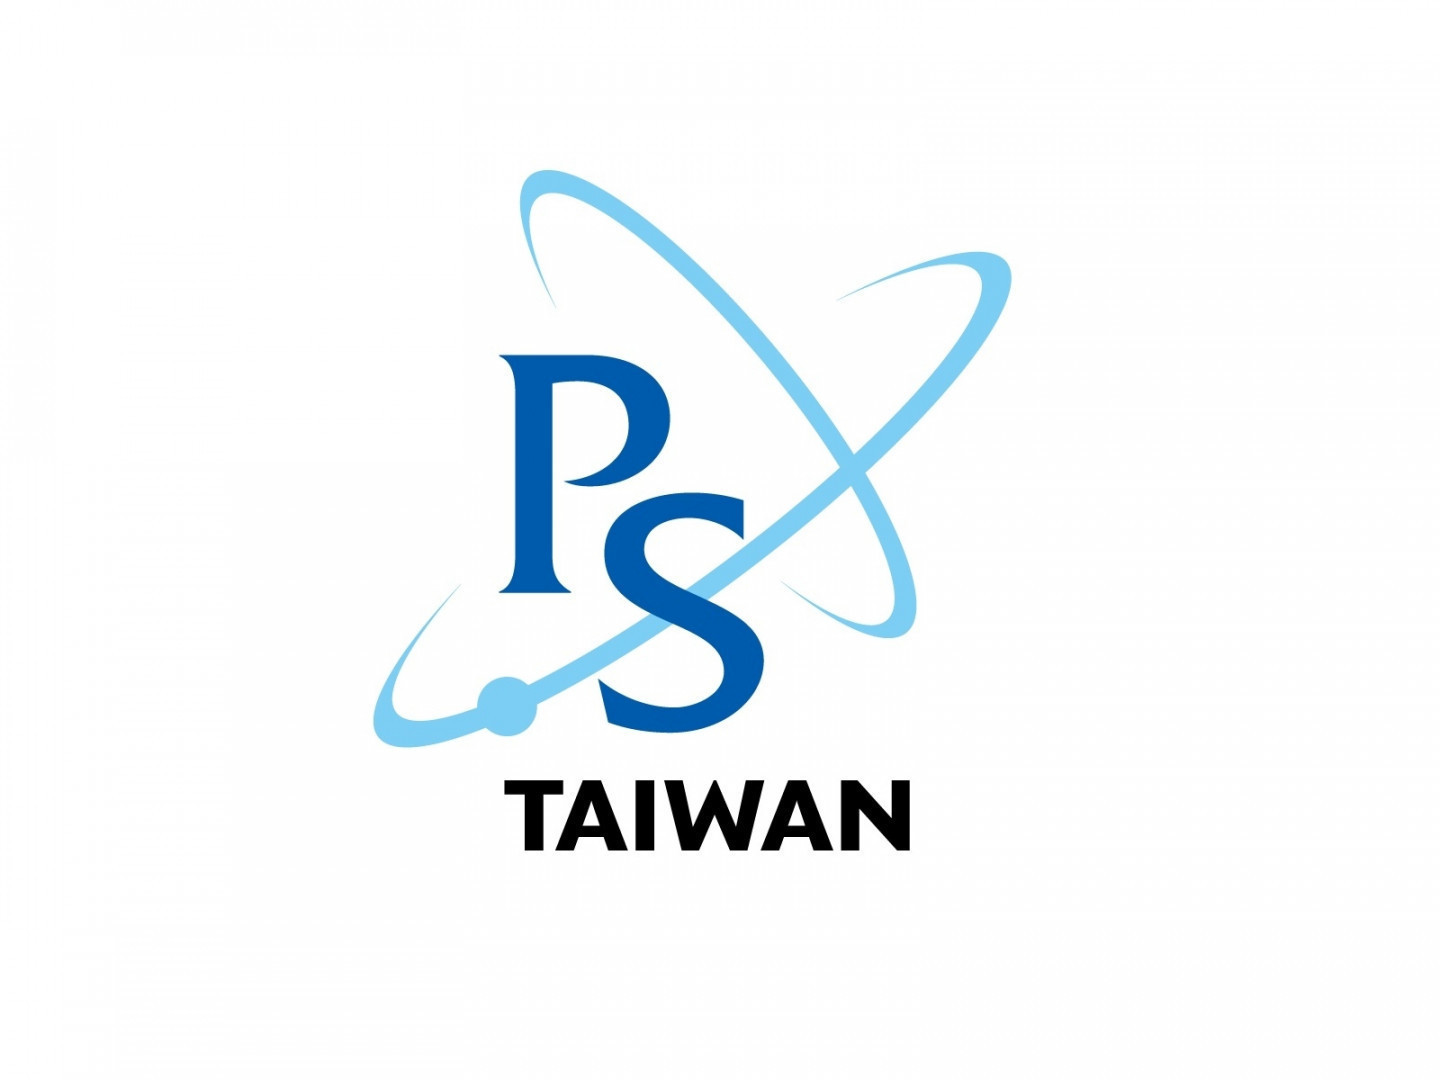  Faculty Positions in Physics, Applied physics and Astrophysics at National Taiwan University (NTU) 